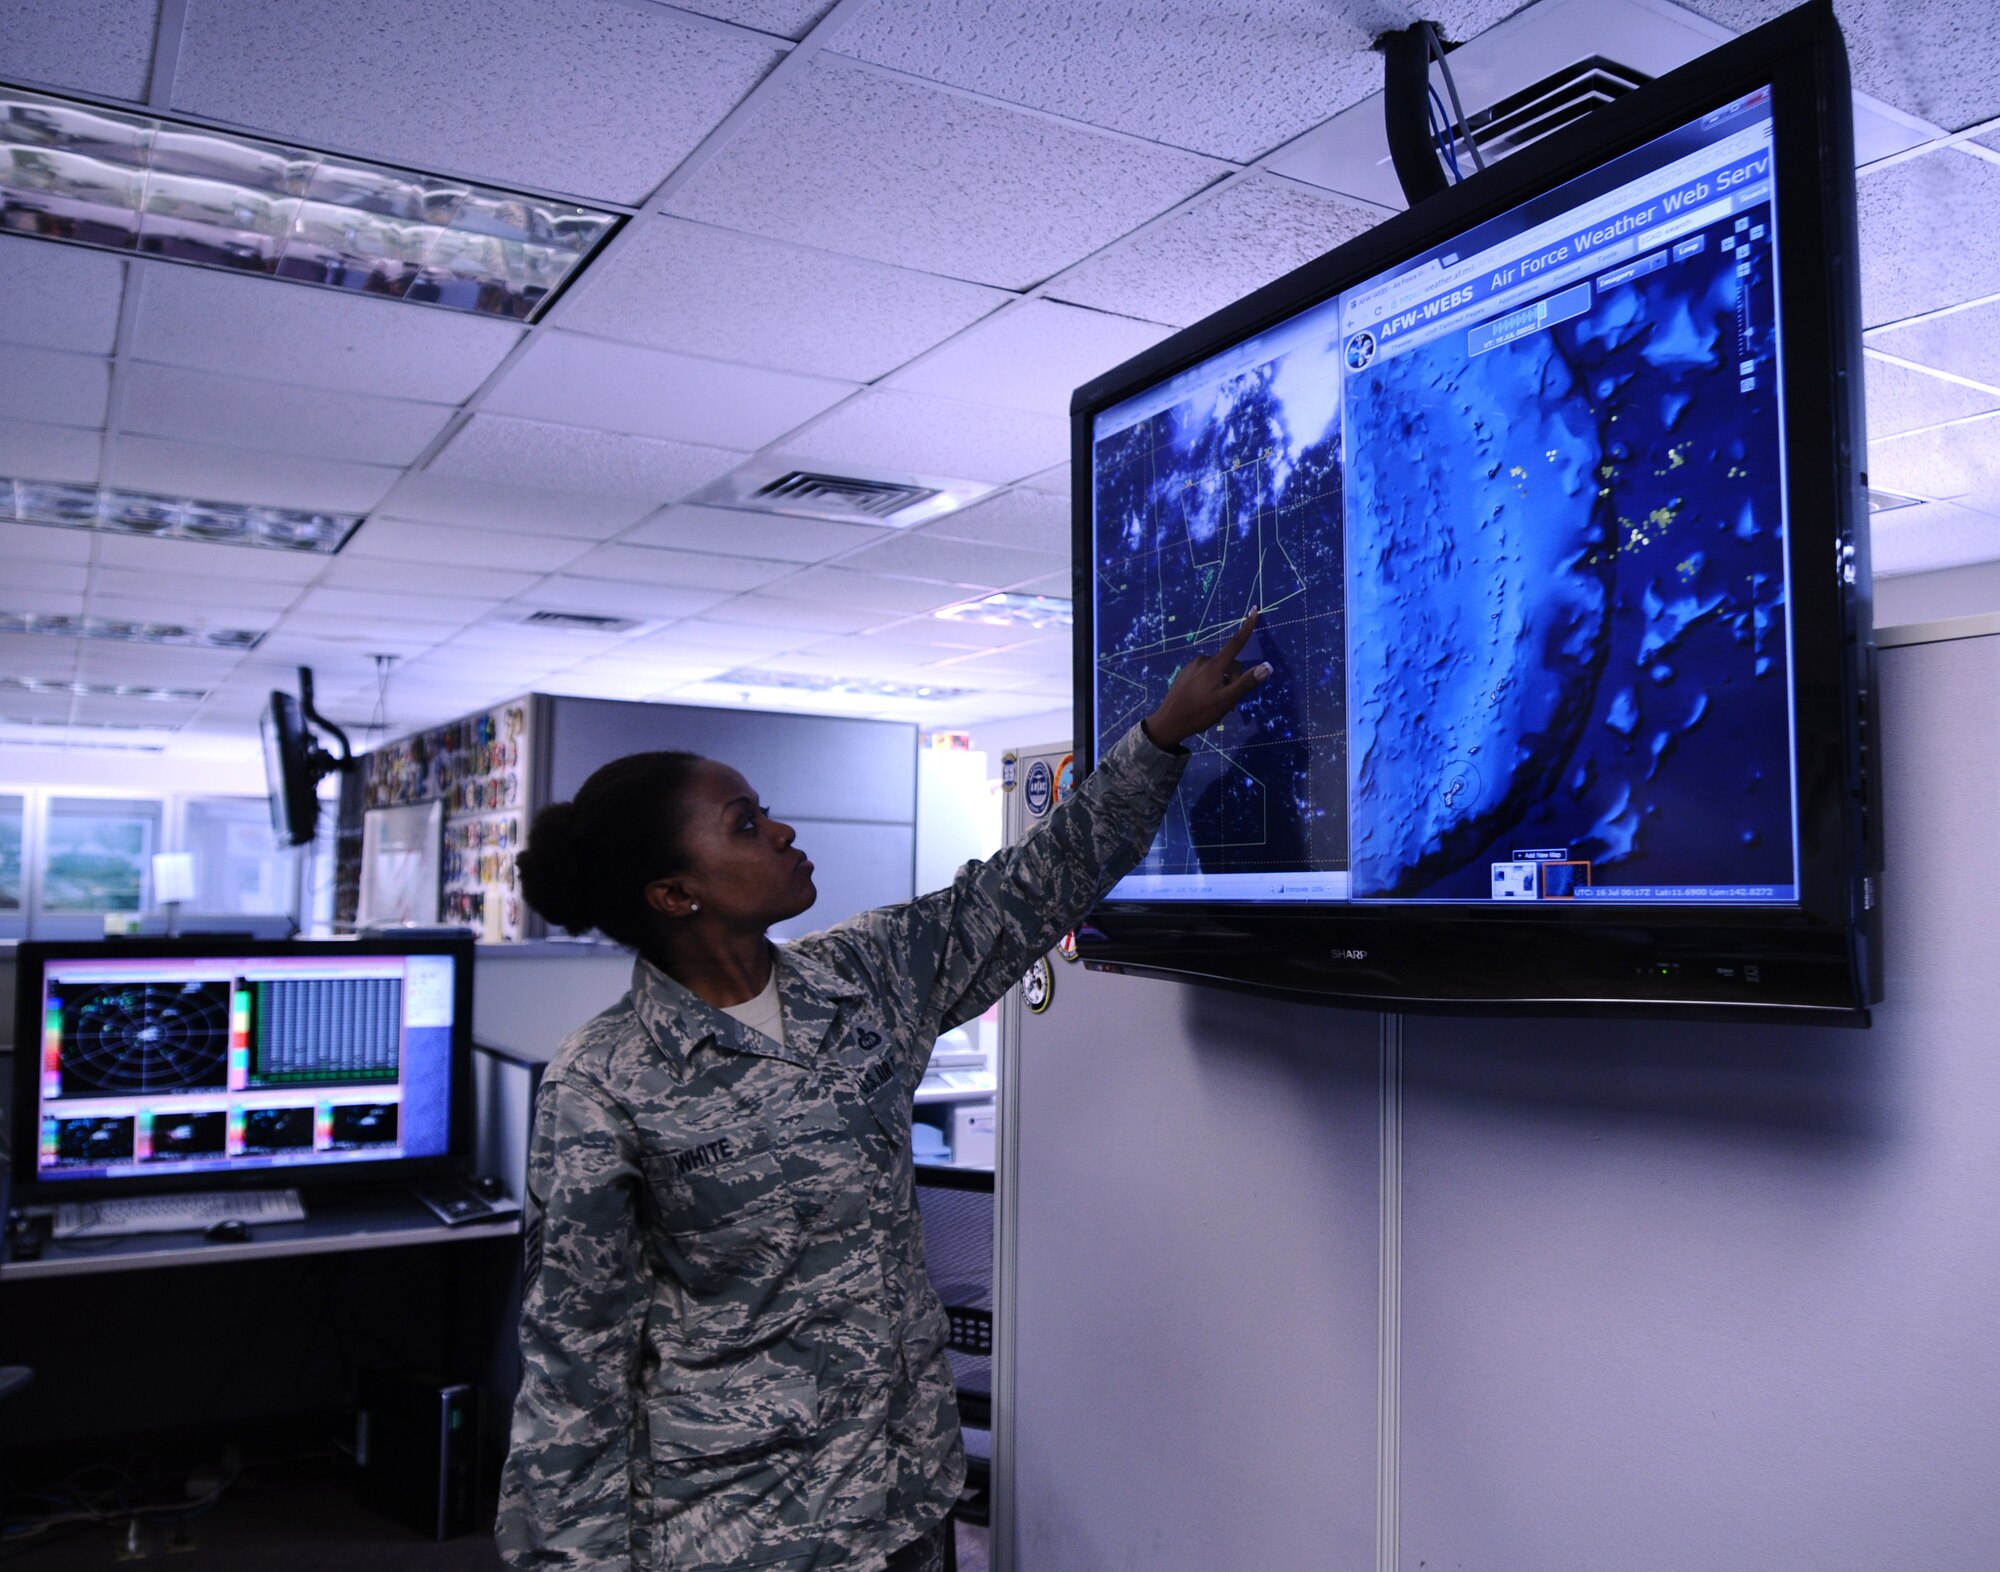 Master Sgt. Vernee White, 36th Operations Group mission weather element NCO in charge, observes and records changes in approaching weather systems on Andersen Air Force Base, Guam, July 16, 2013. Satellite imagery and lightning detection are used to forecast approaching weather systems that could affect scheduled flight plans. (U.S. Air Force photo by Airman 1st Class Mariah Haddenham/Released)